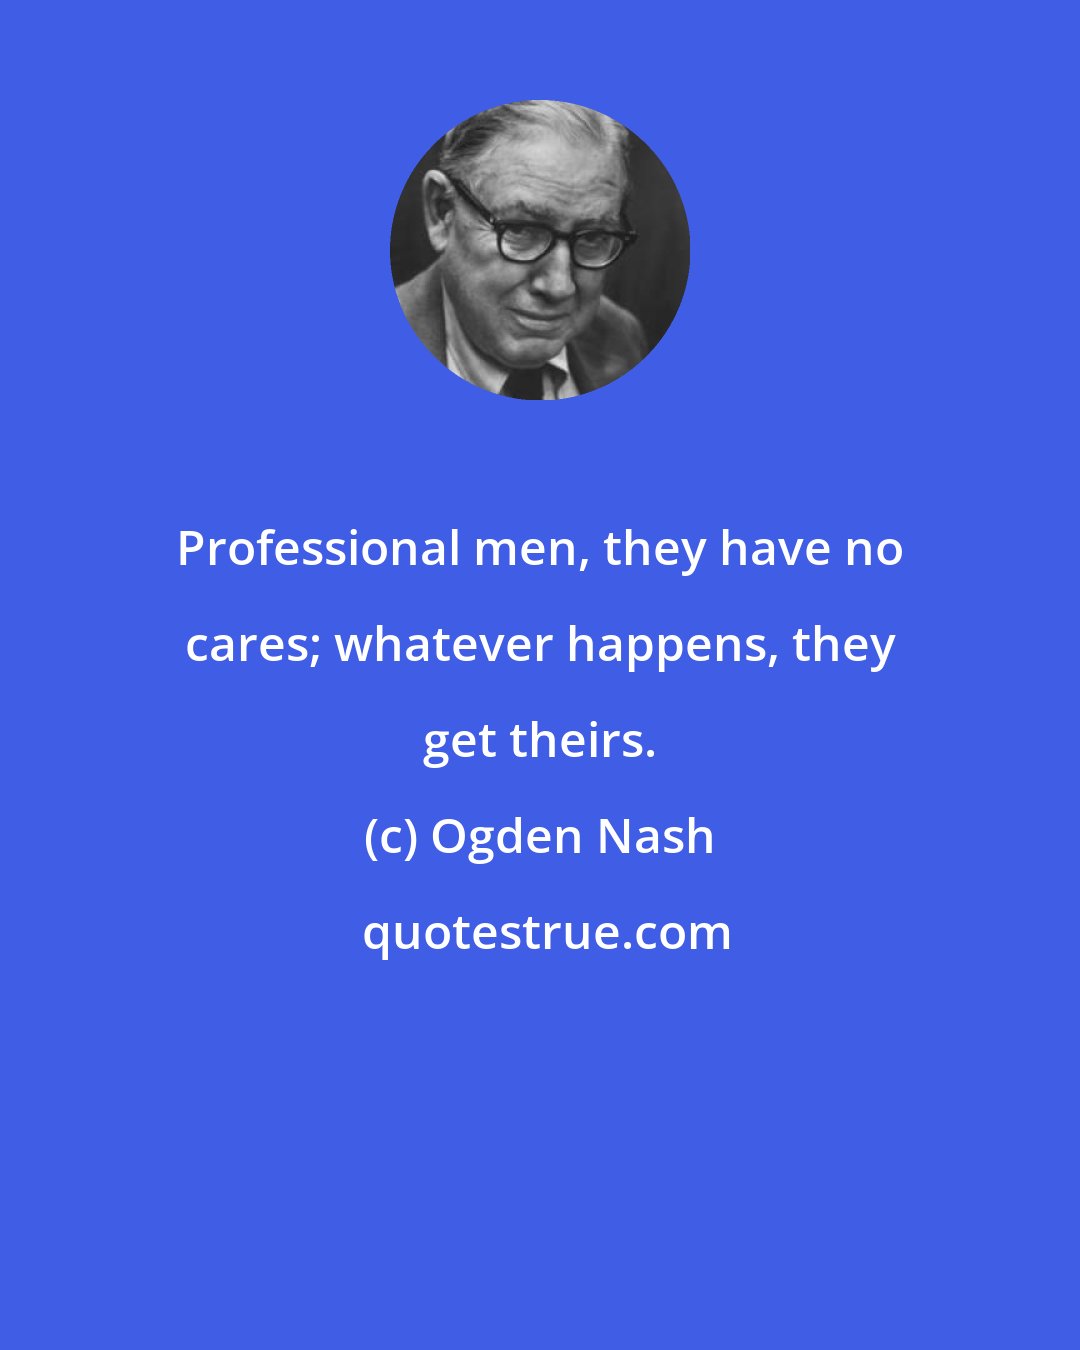 Ogden Nash: Professional men, they have no cares; whatever happens, they get theirs.